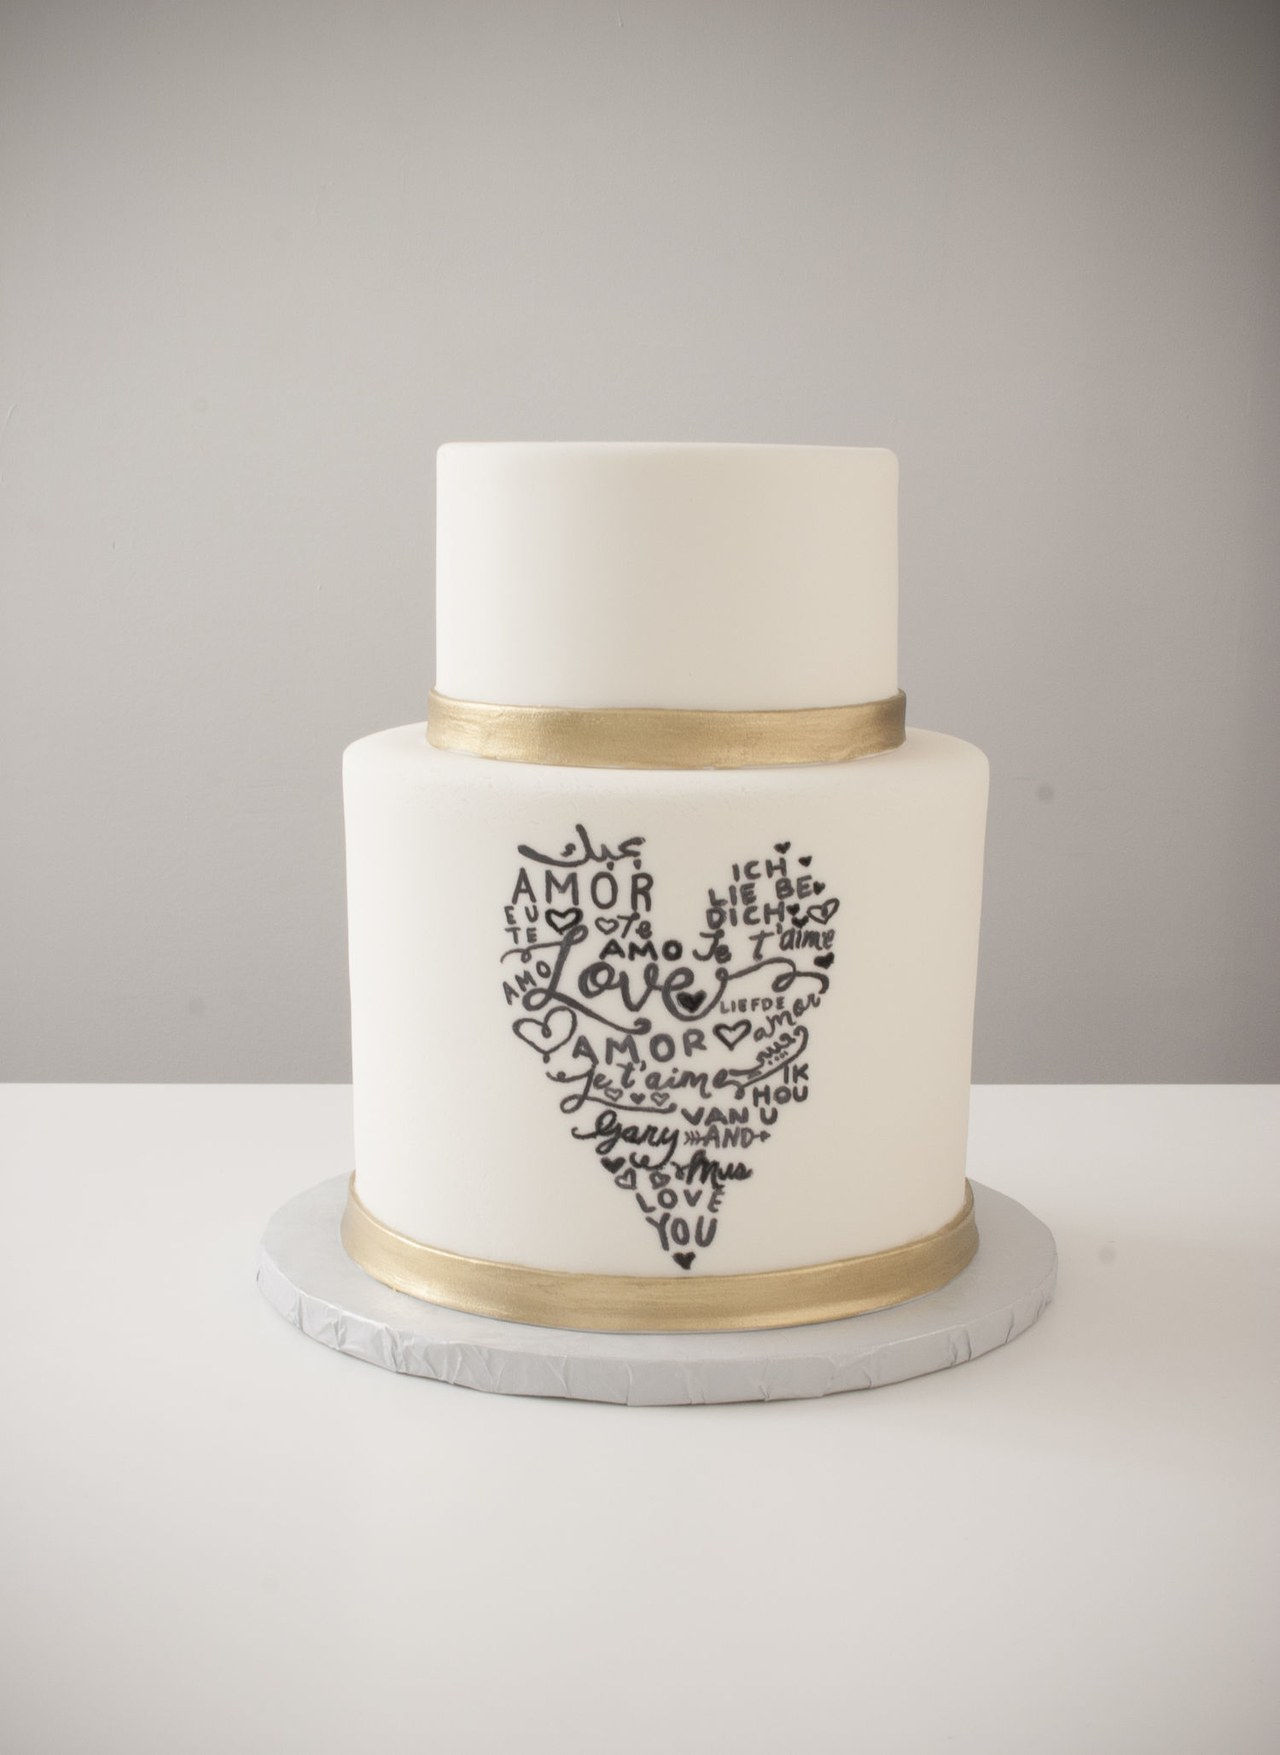 07 2016 wedding cake trends painted cakes a white cake